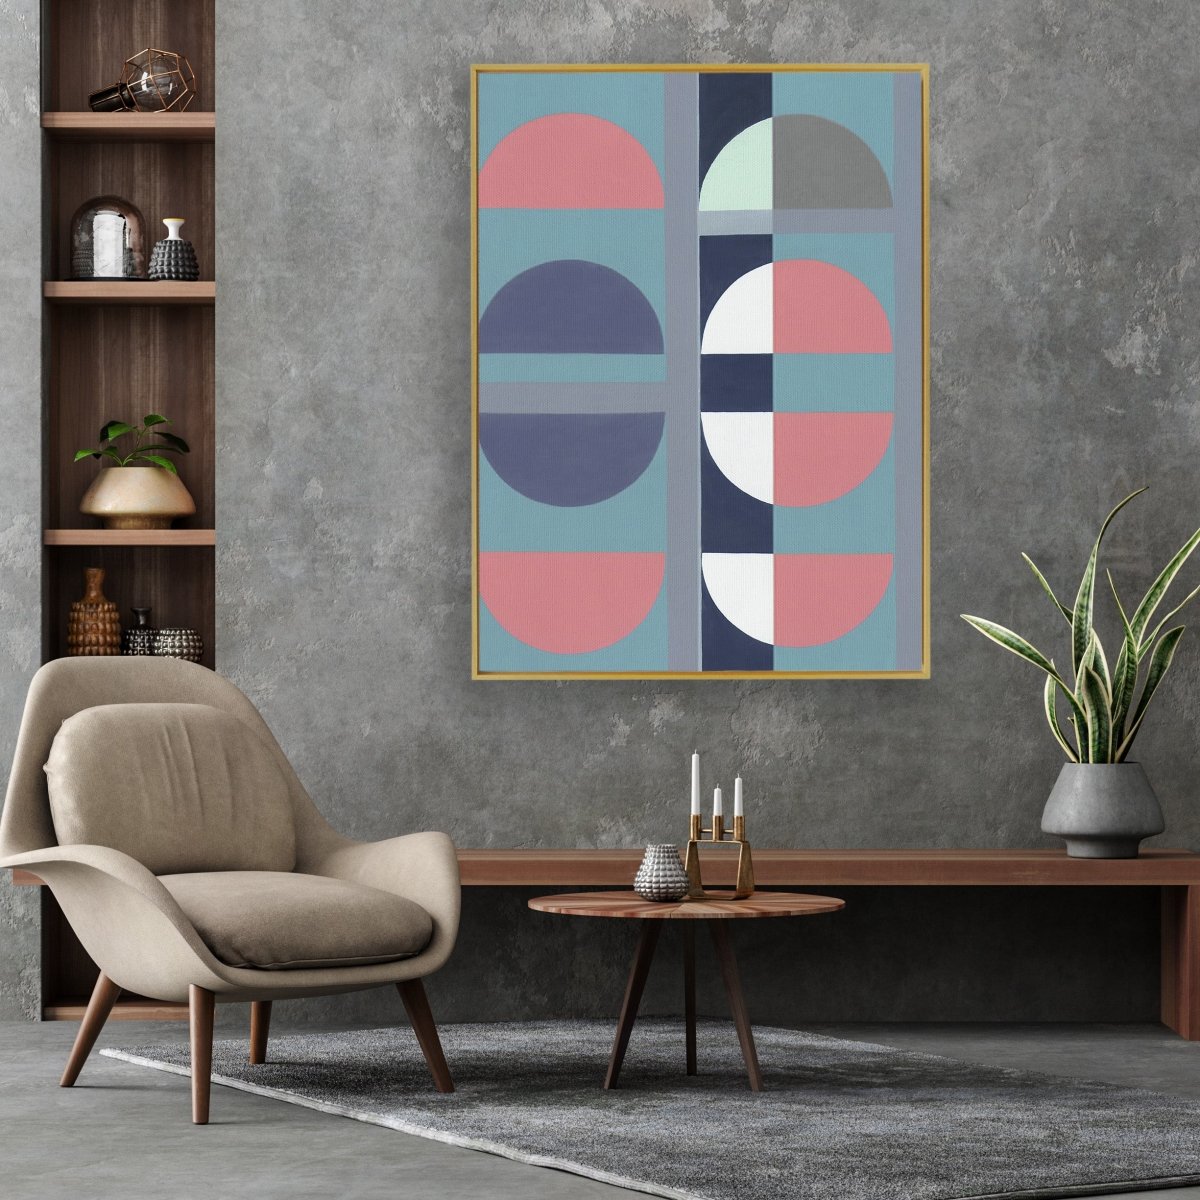 Half Circles 3 framed vertical large canvas wall art piece for sale at Vybe Interior